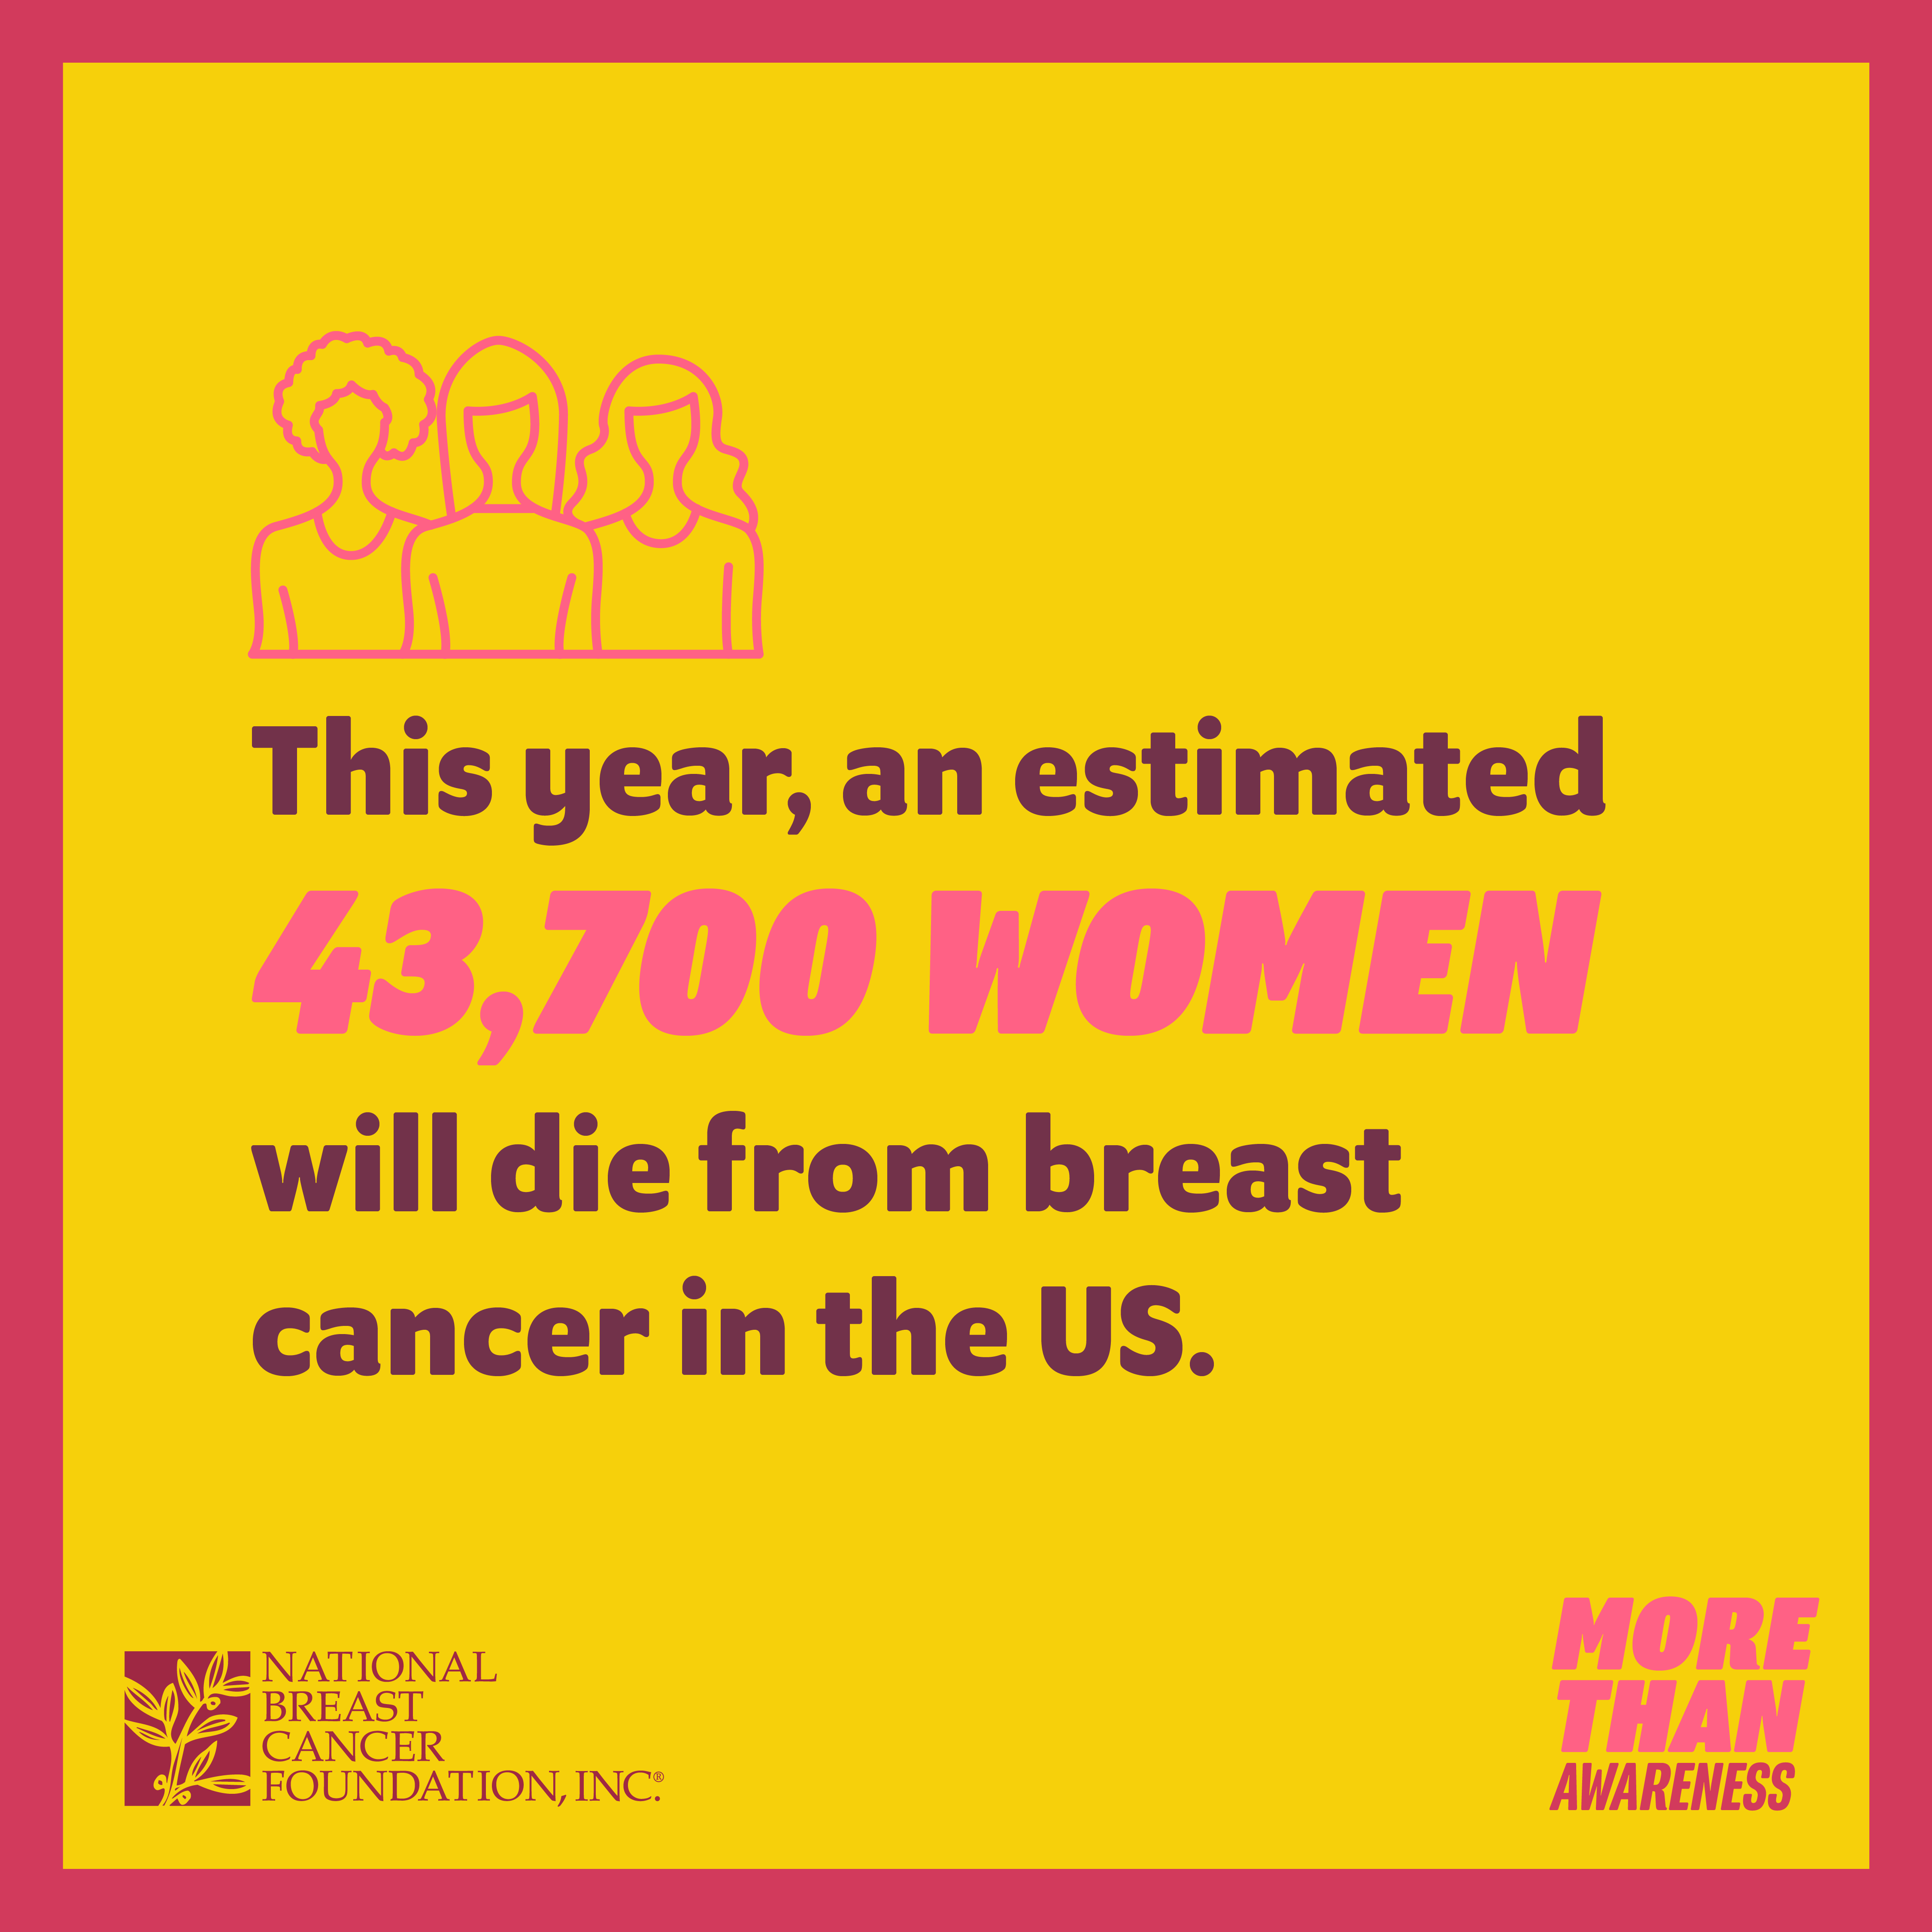 This year, an estimated 43,700 women will die from breast cancer in the U.S.